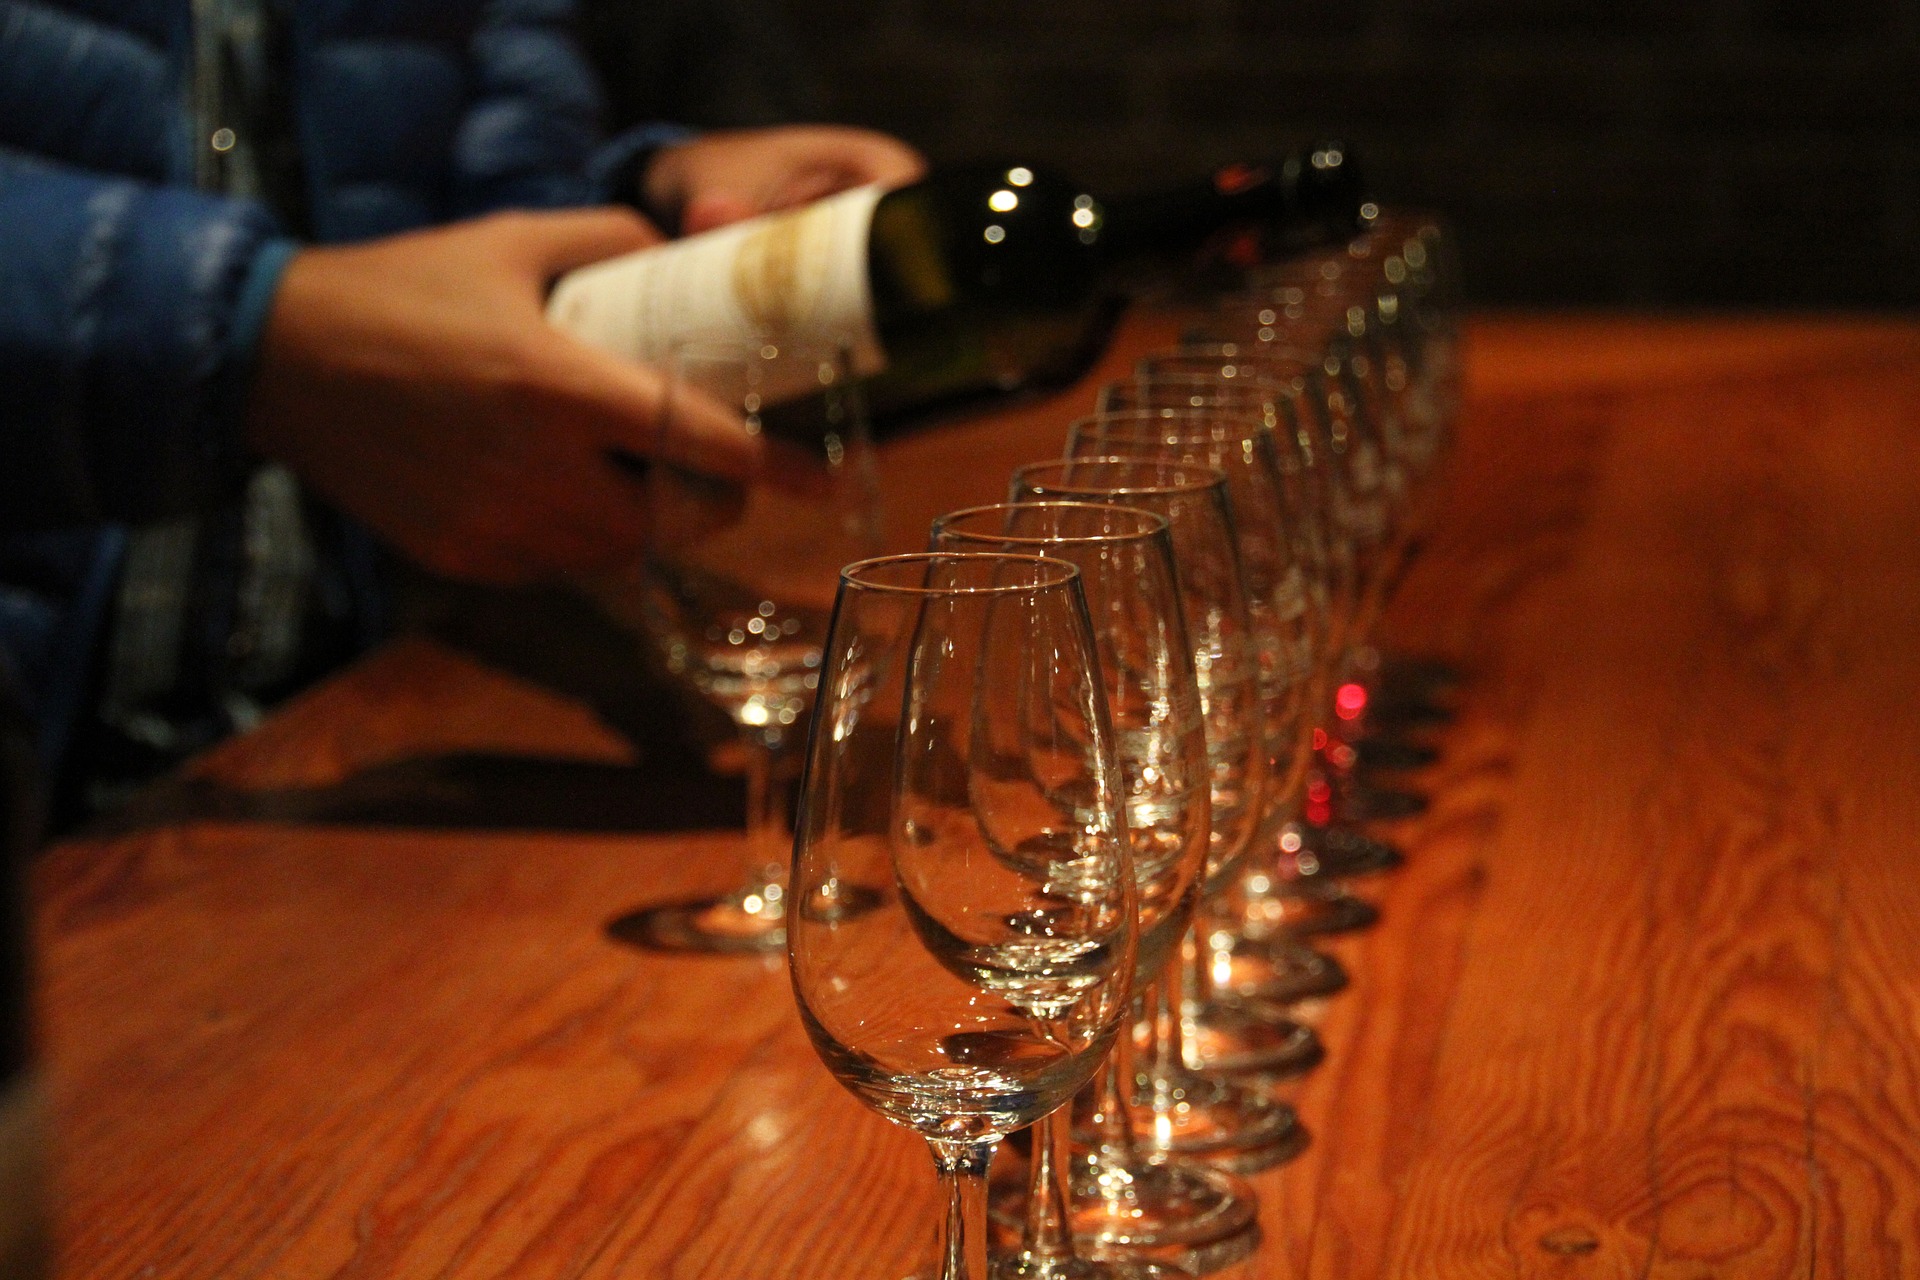 A wine tasting class with wine being poured into a series of glasses